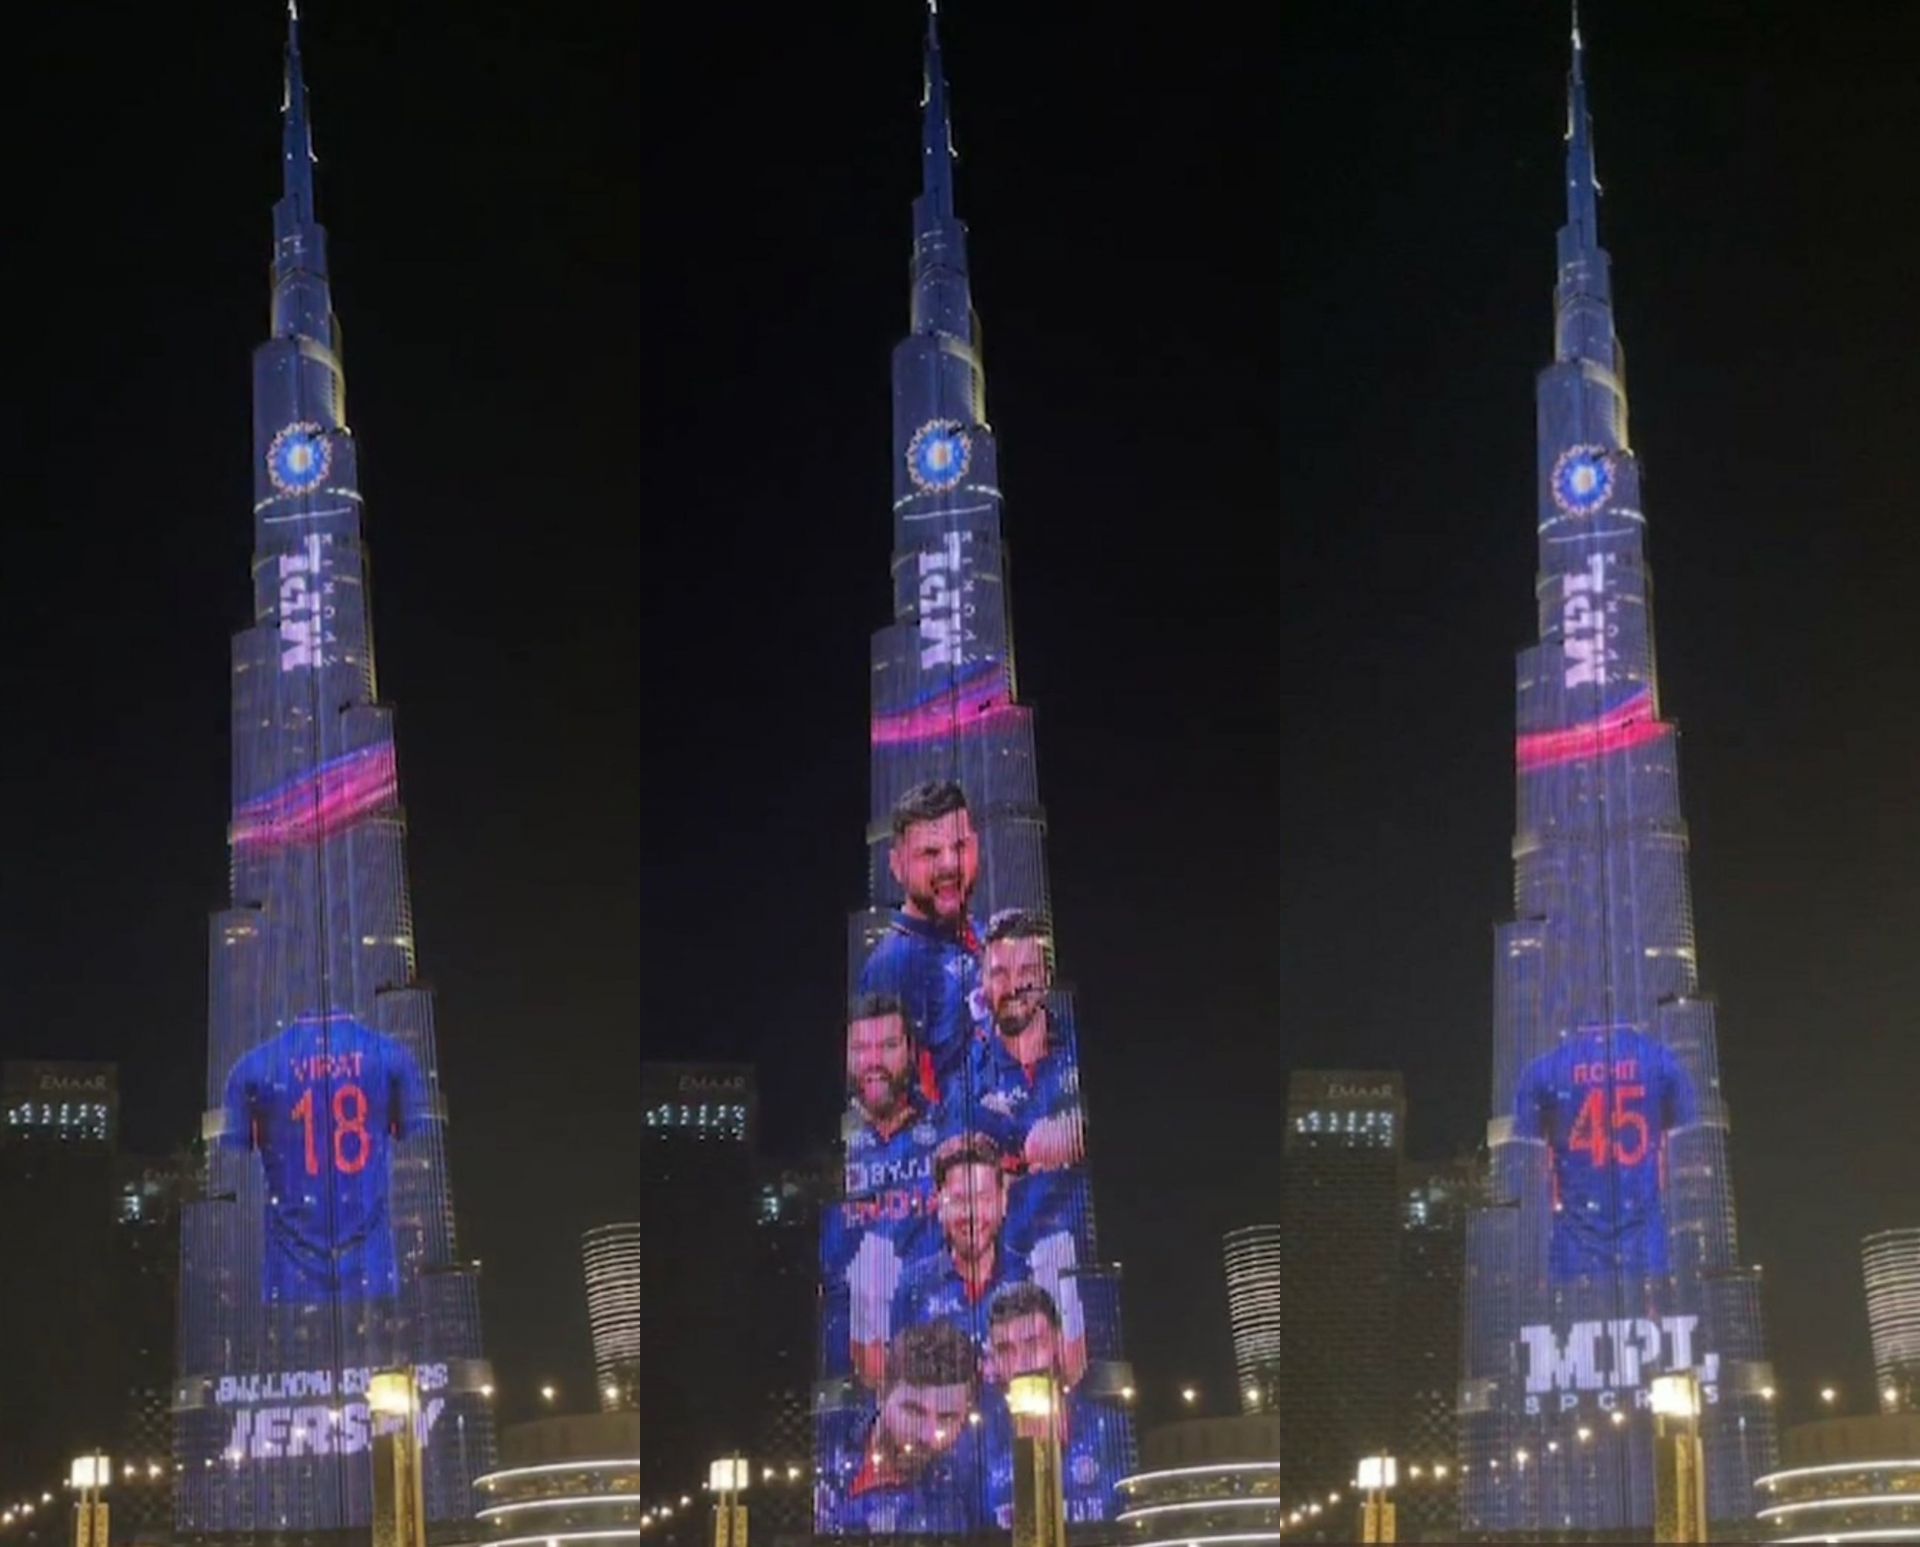 Indian players sporting brand new jerseys for the T20 World Cup in a projection on Burj Khalifa. (Image: BCCI)